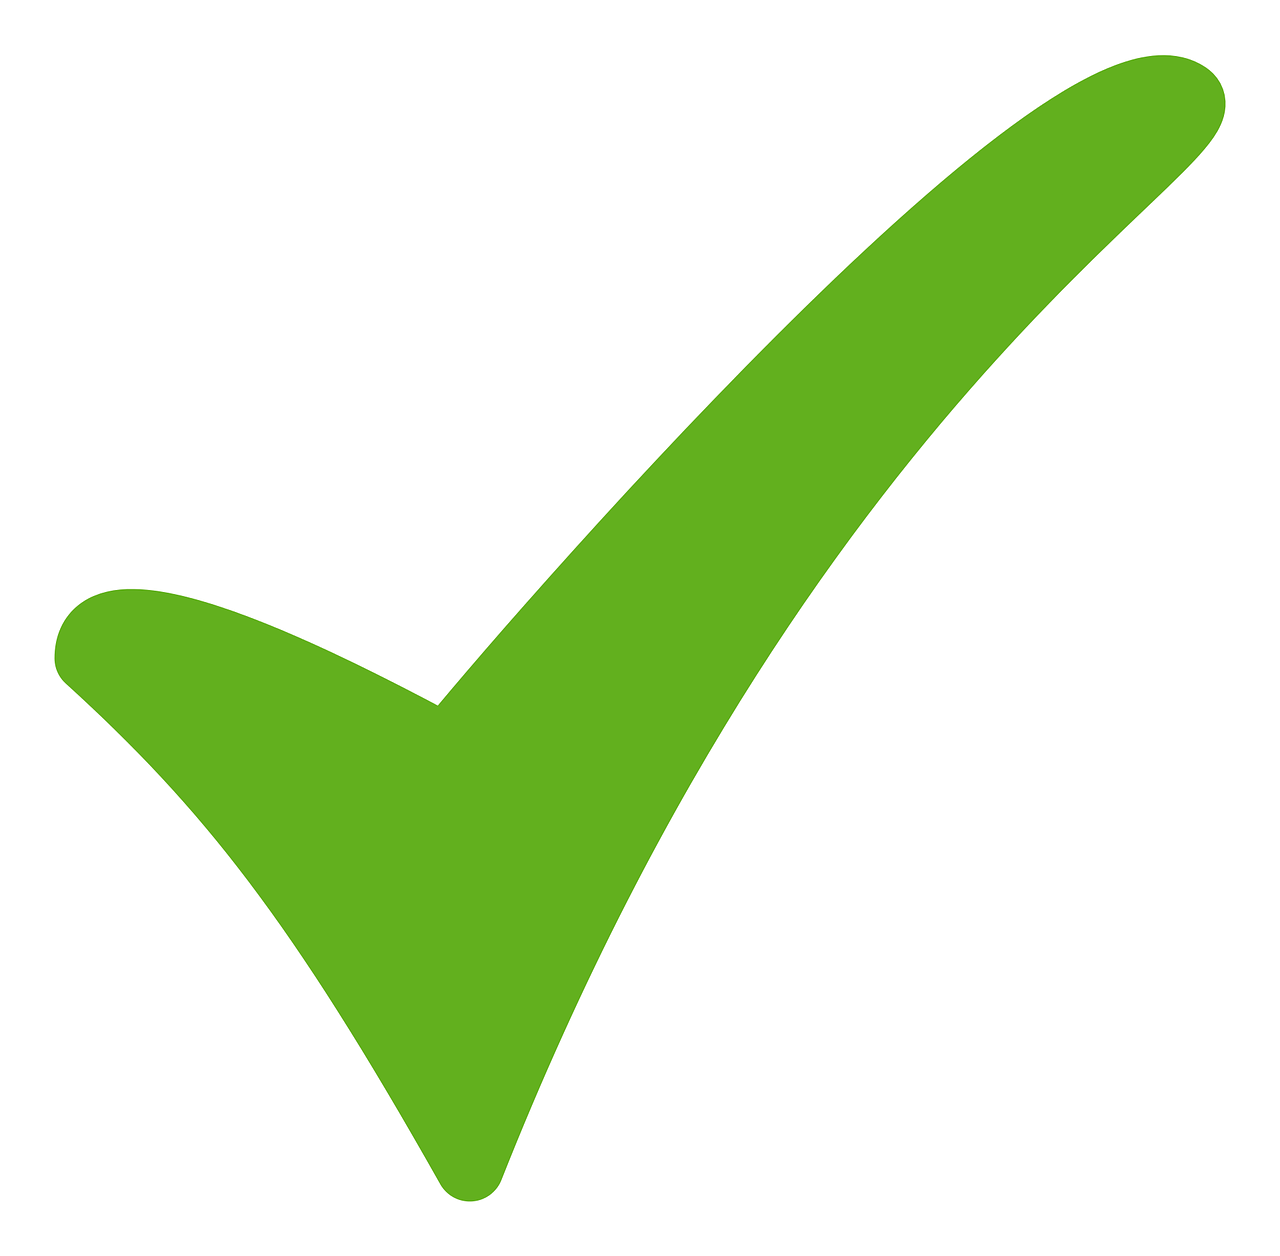 a green check mark icon with white lettering